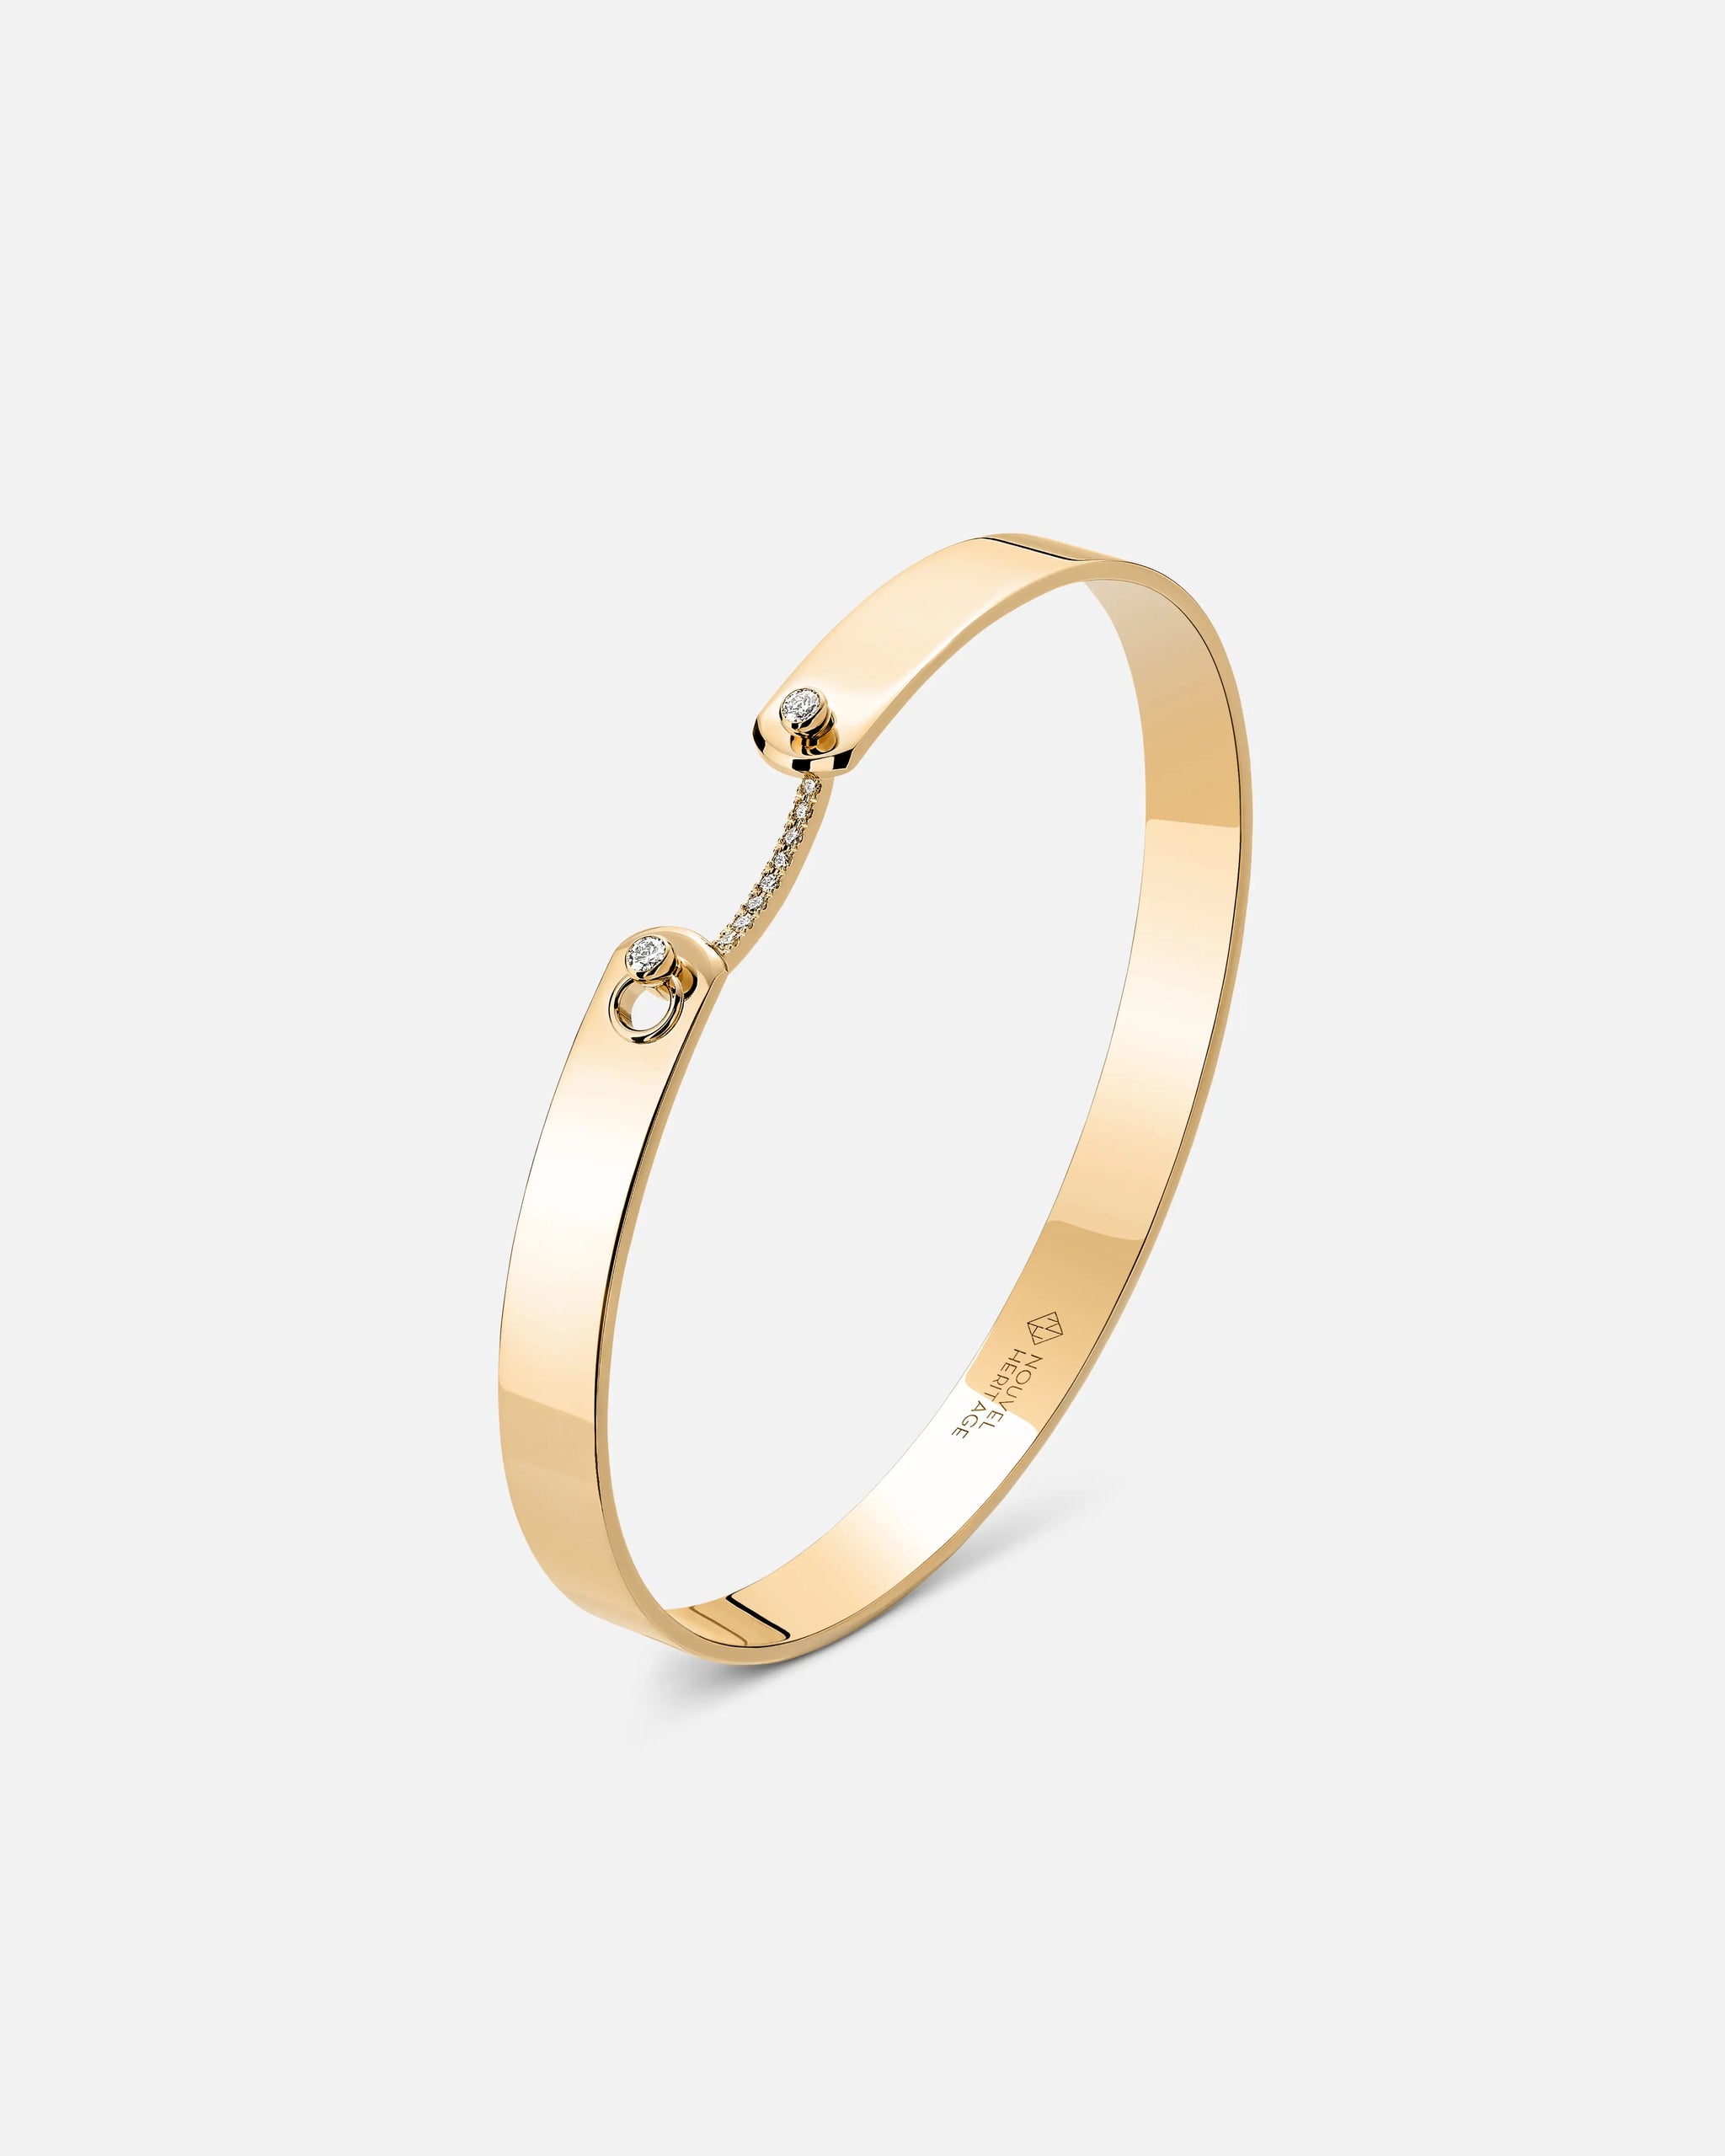 Business Meeting GM Mood Bangle in Yellow Gold - 1 - Nouvel Heritage